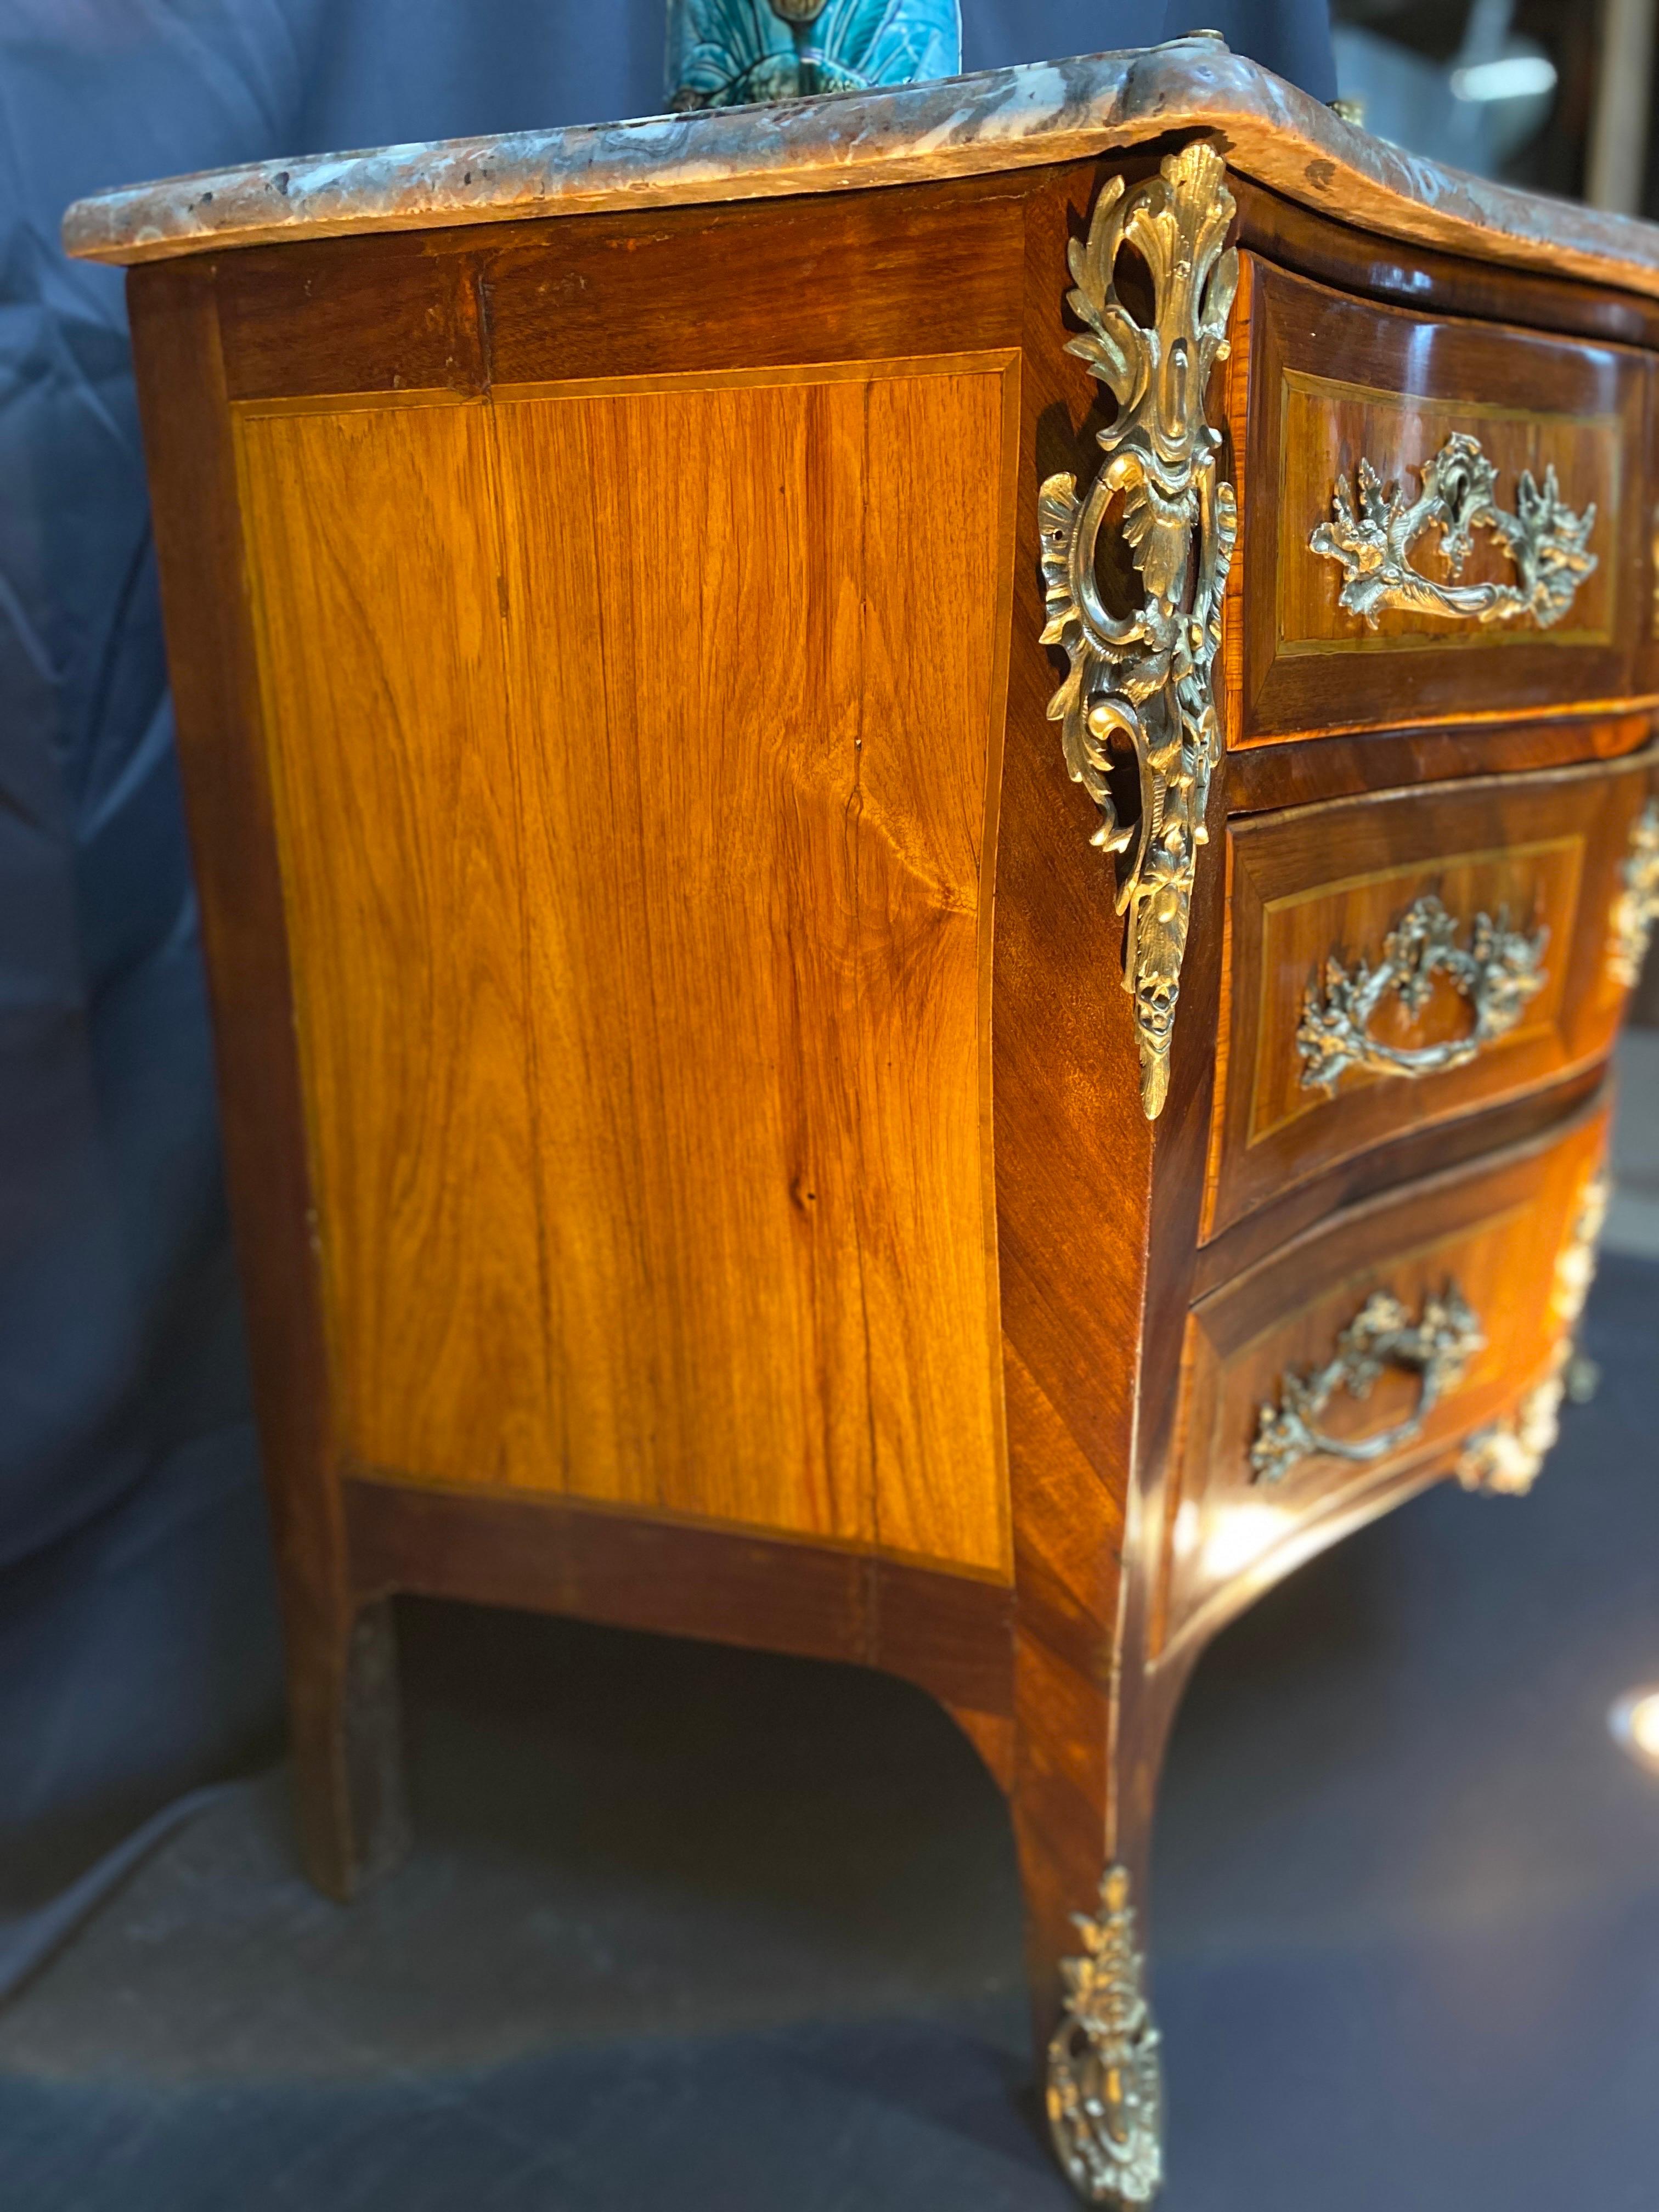 magnificent tomb chest of drawers small Parisian model Louis XV period 18th century stamped Jean Charles Ellaume (1714-1763) received master on November 6, 1754 very pretty chest of drawers inlaid with rosewood and violet in good condition consists